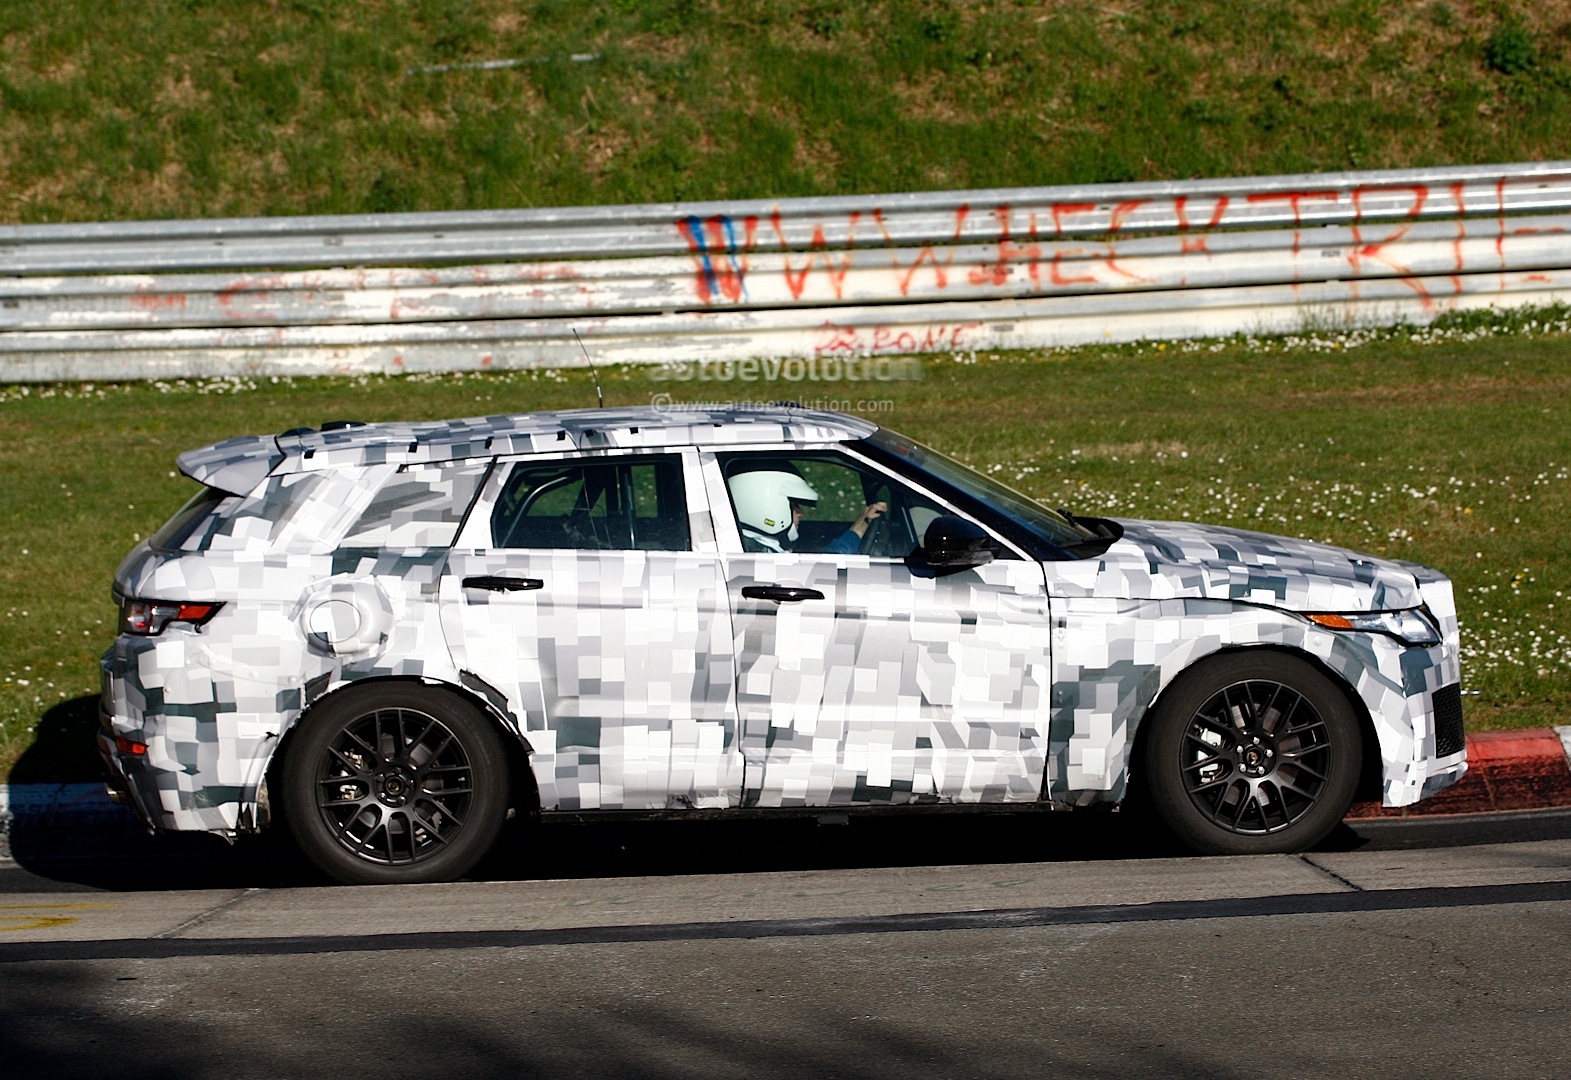 Download Nurburgring: Jaguar SUV Prototype Takes to the Track - autoevolution